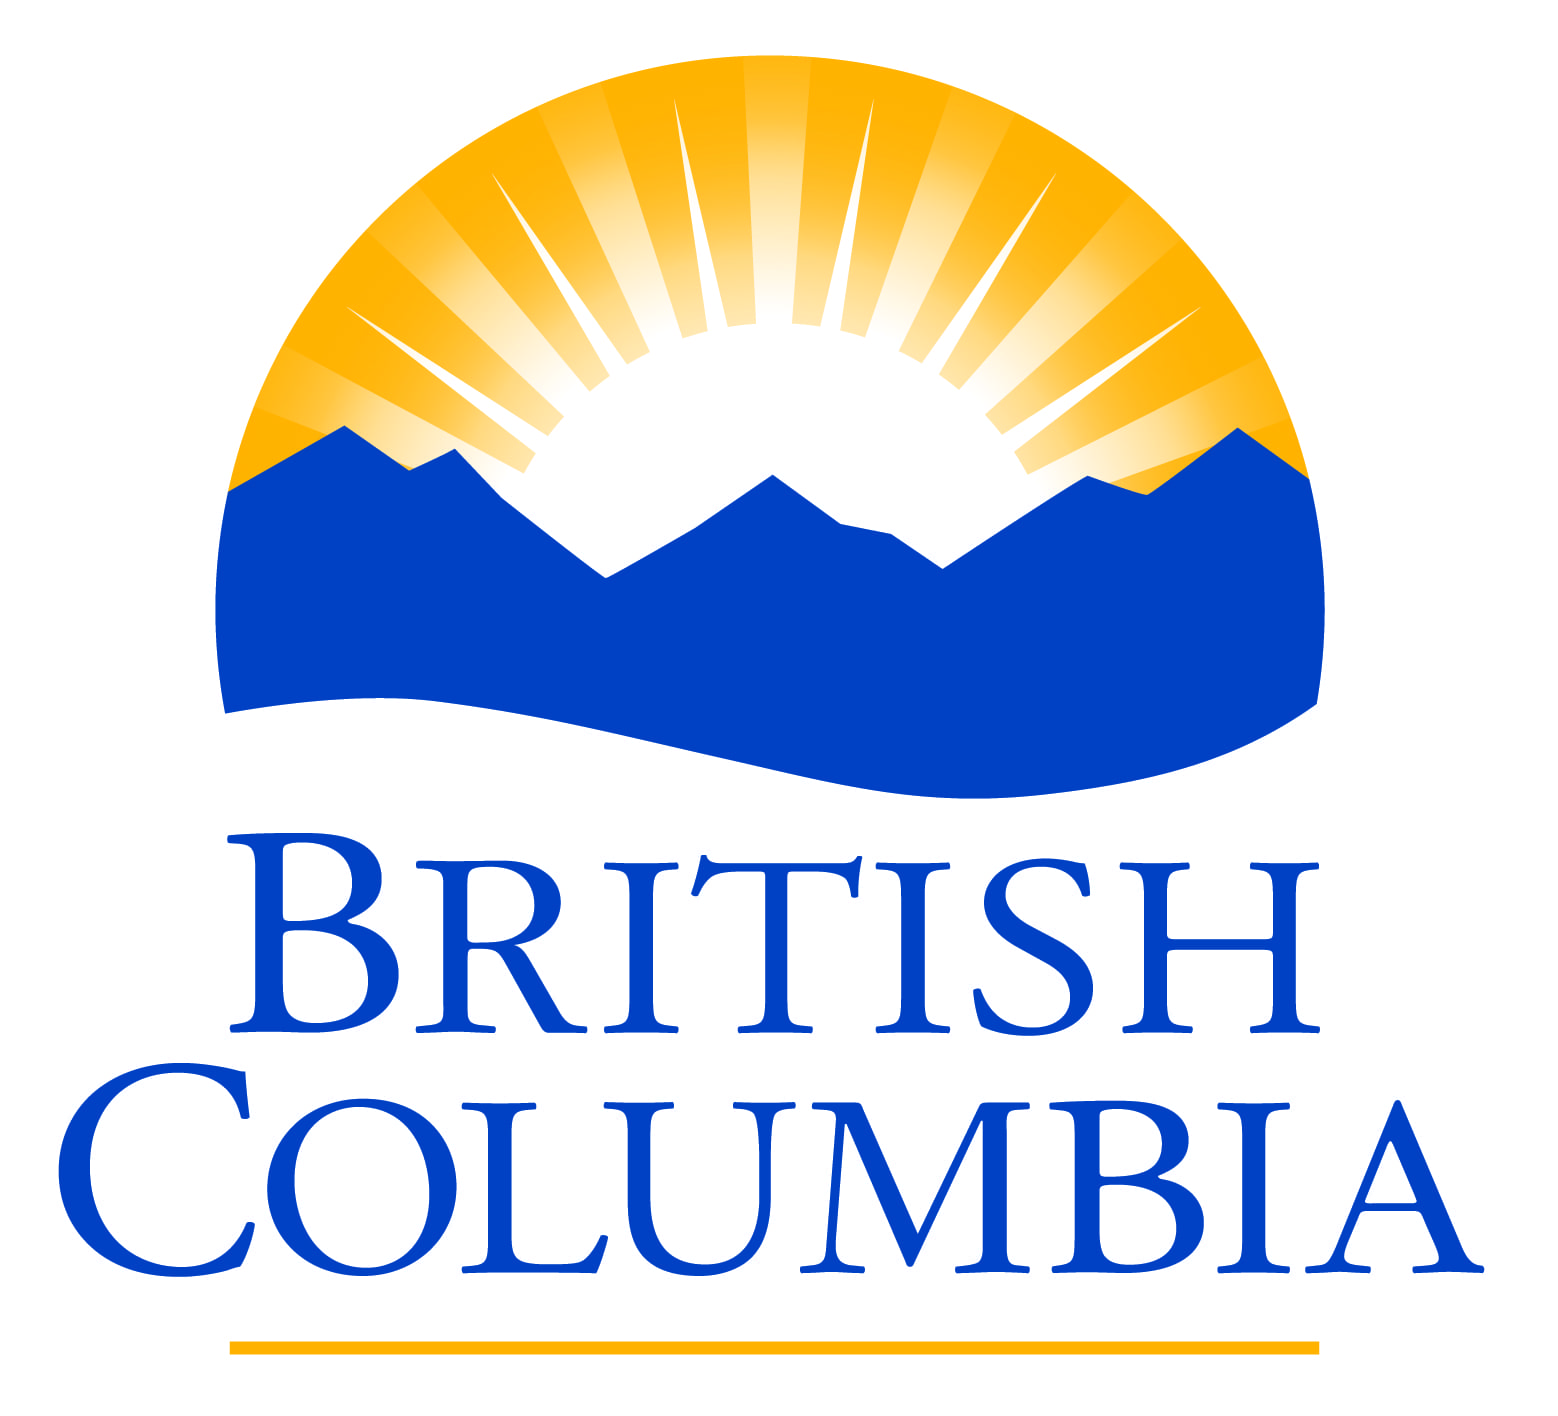 March 28 update on COVID-19 in BC